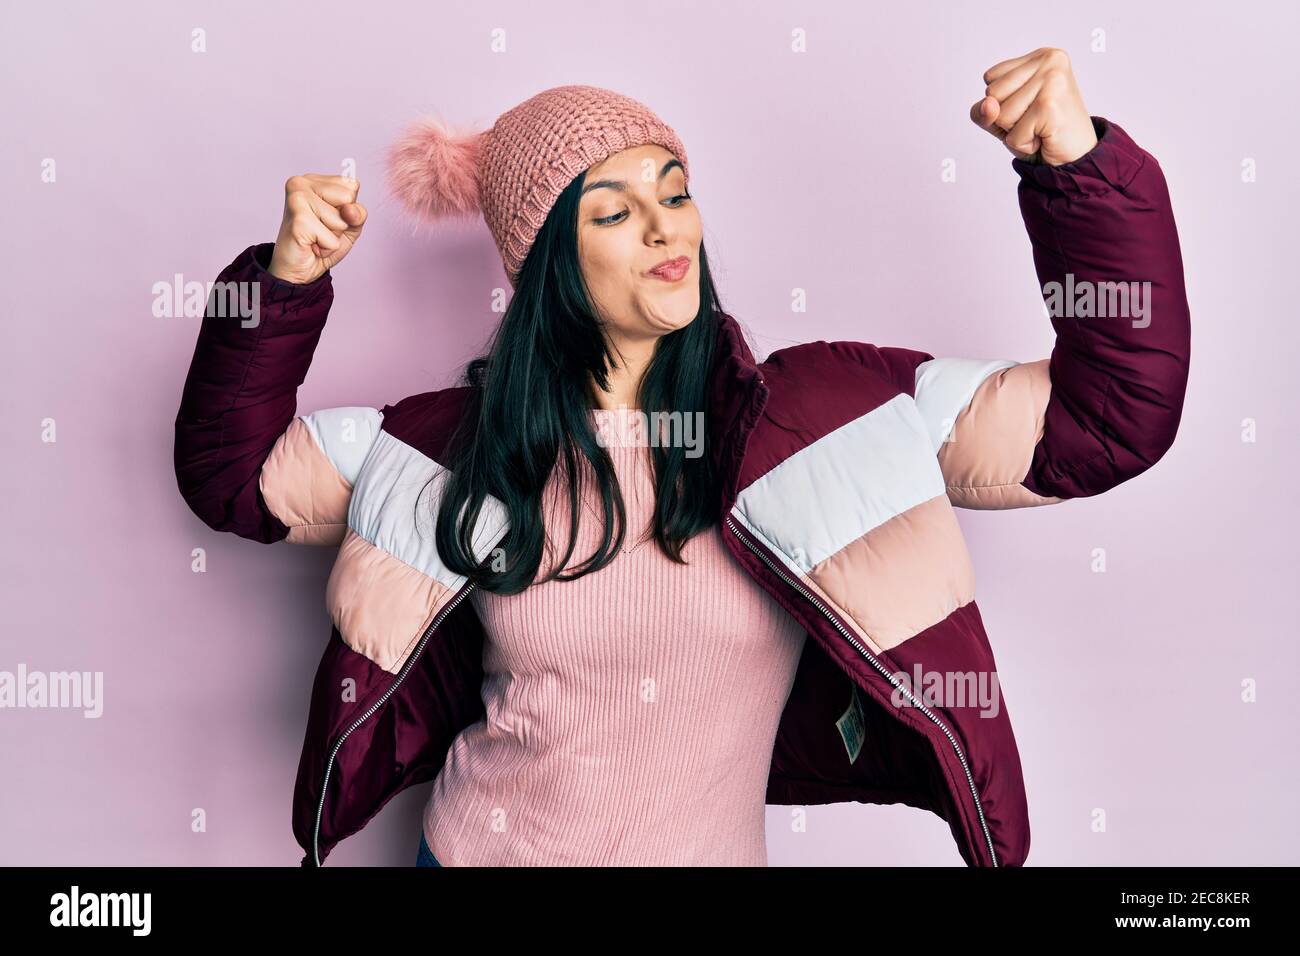 Young hispanic woman wearing wool winter sweater and cap showing arms muscles smiling proud. fitness concept. Stock Photo